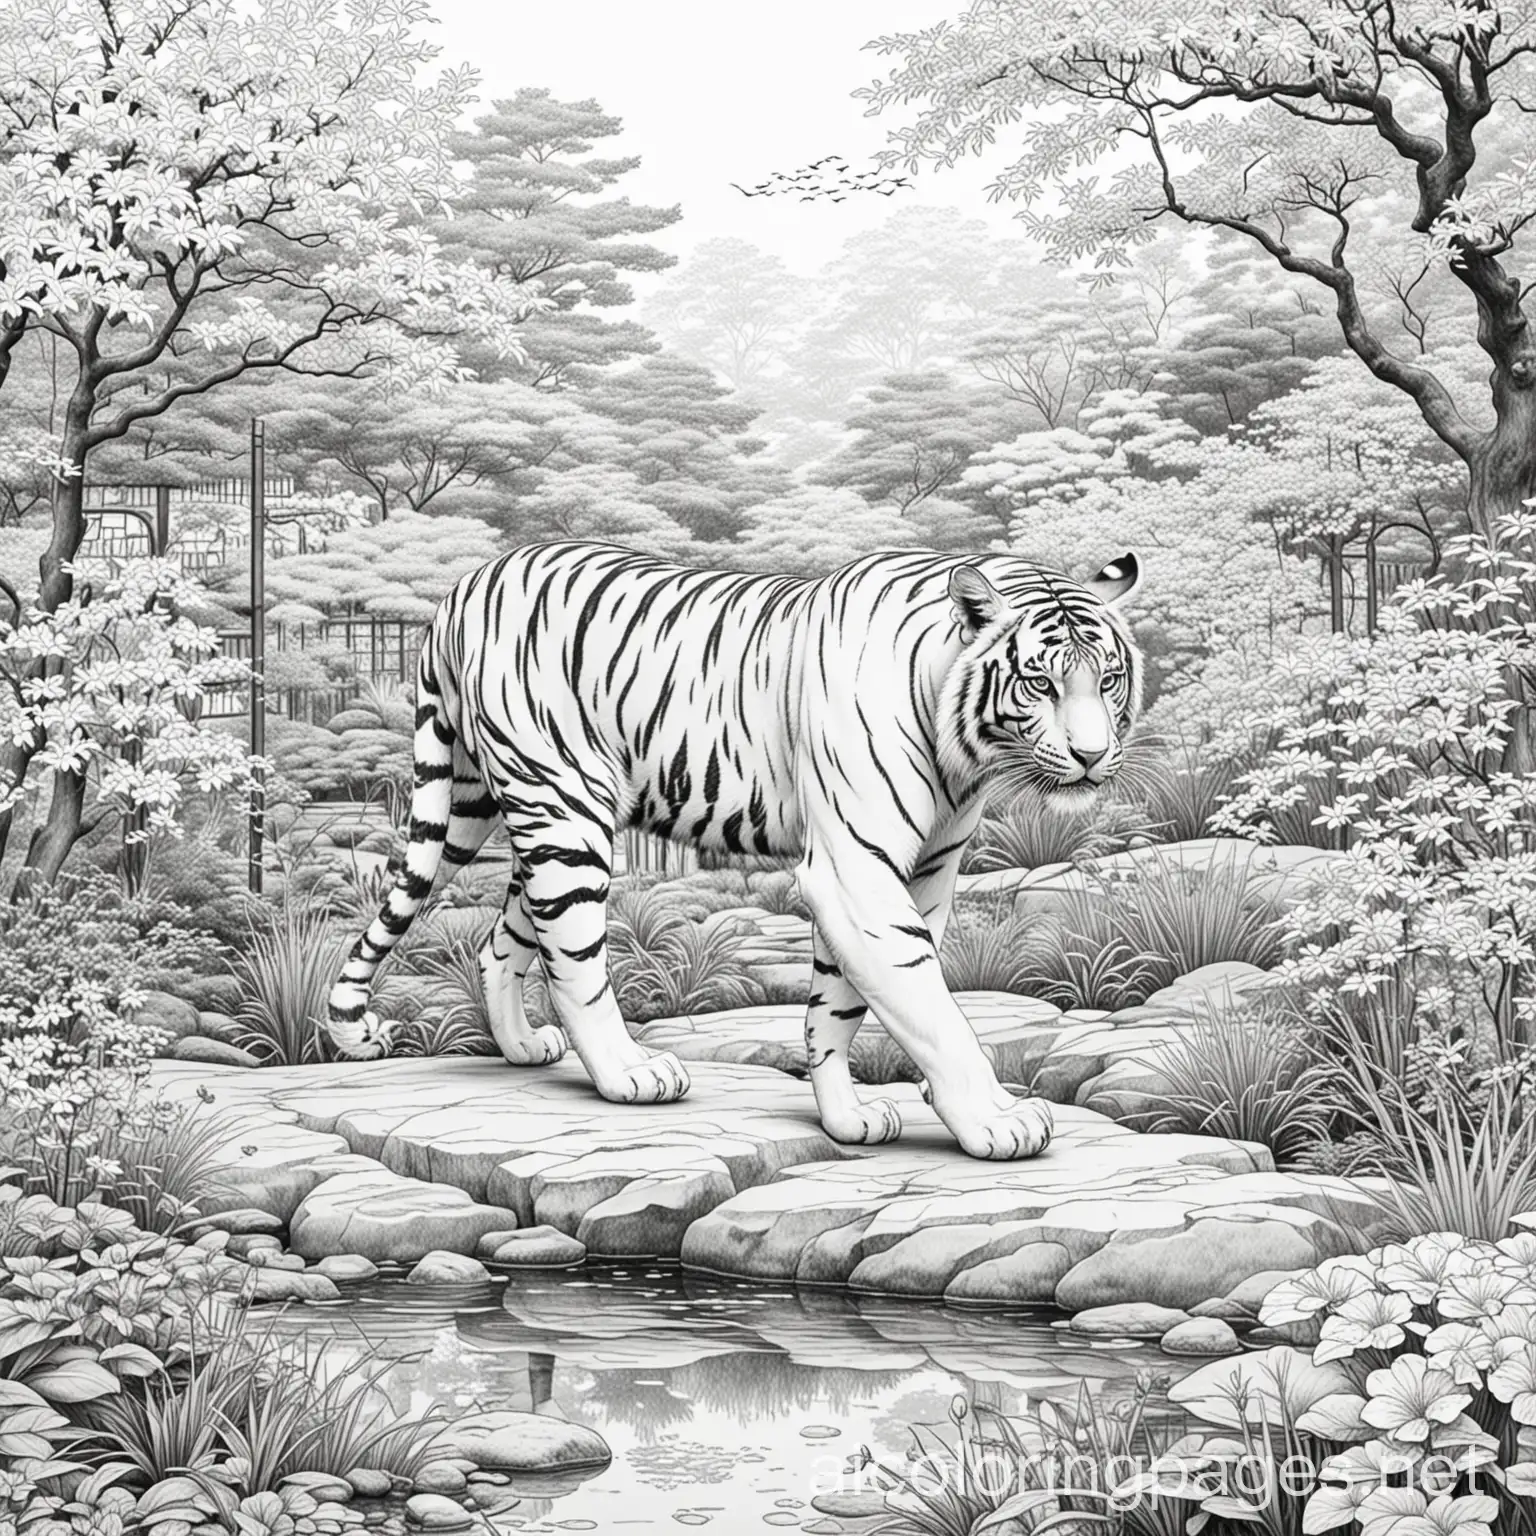 tiger in a japanese garden, Coloring Page, black and white, line art, white background, Simplicity, Ample White Space. The background of the coloring page is plain white to make it easy for young children to color within the lines. The outlines of all the subjects are easy to distinguish, making it simple for kids to color without too much difficulty